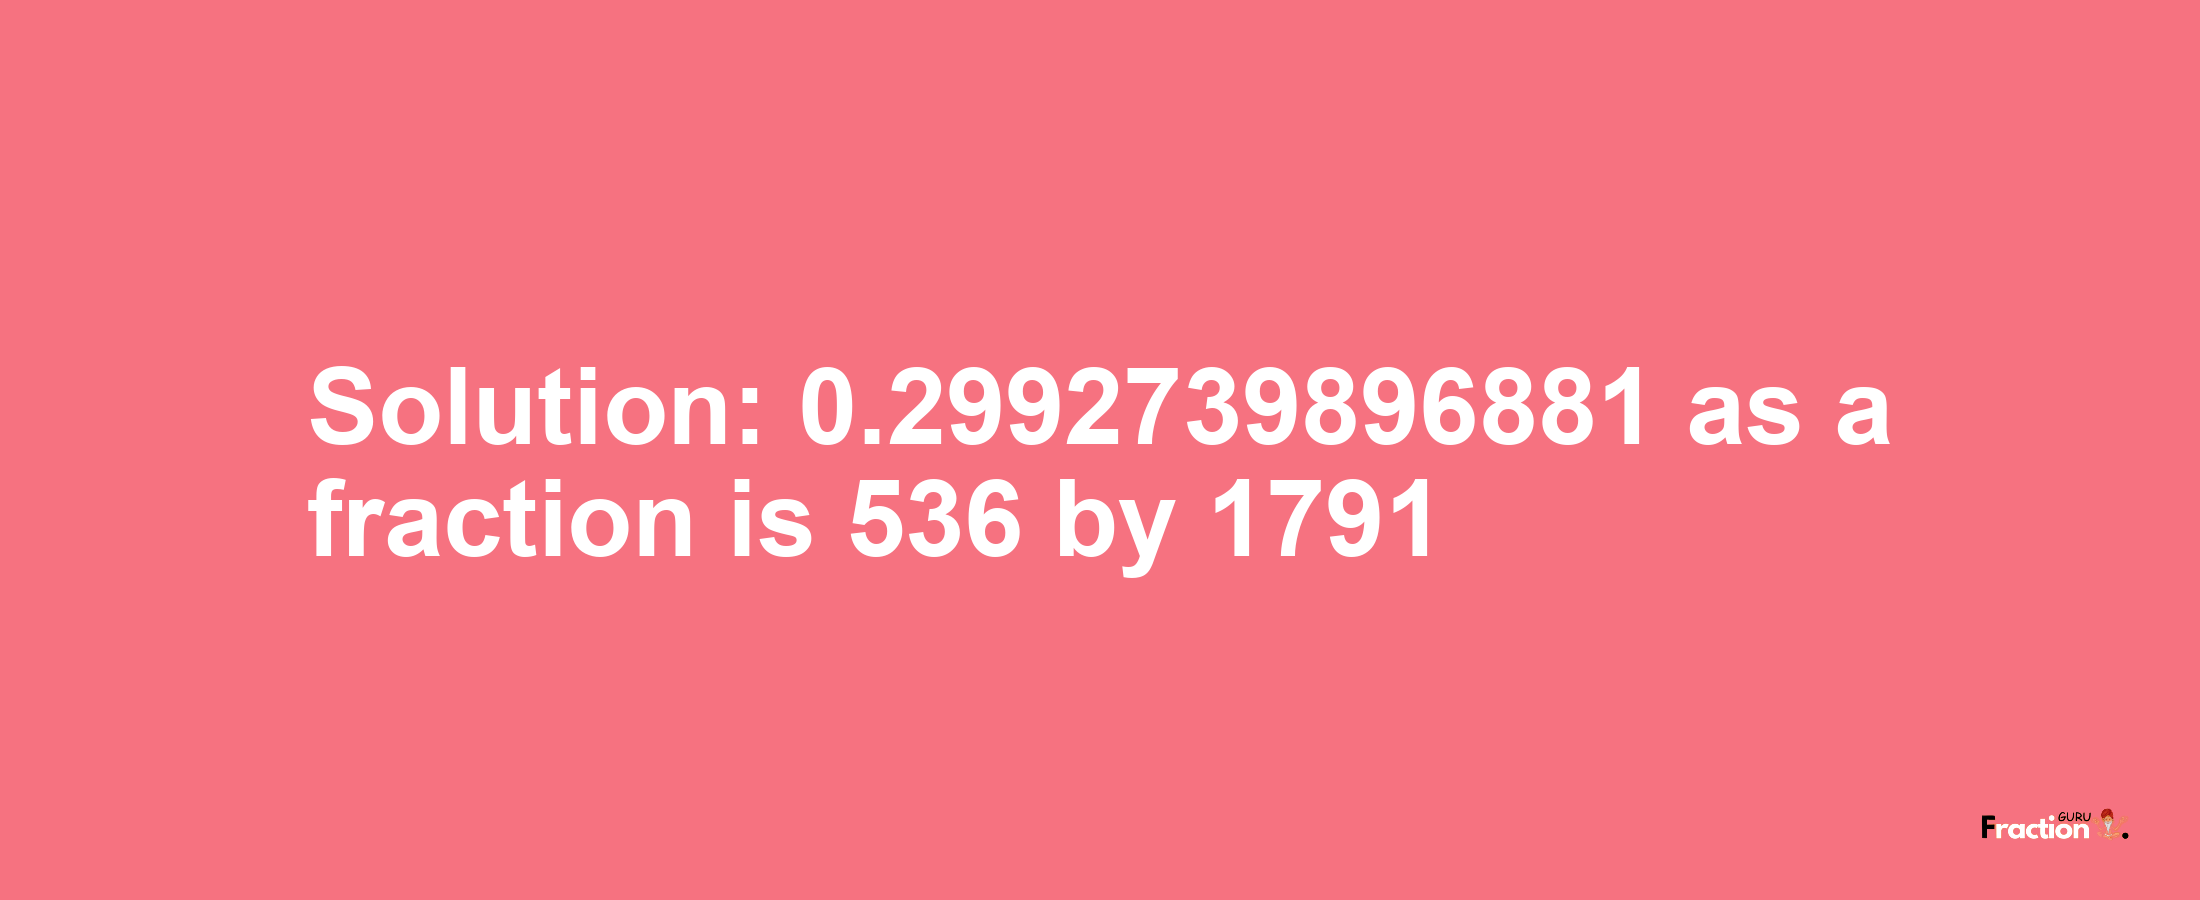 Solution:0.2992739896881 as a fraction is 536/1791